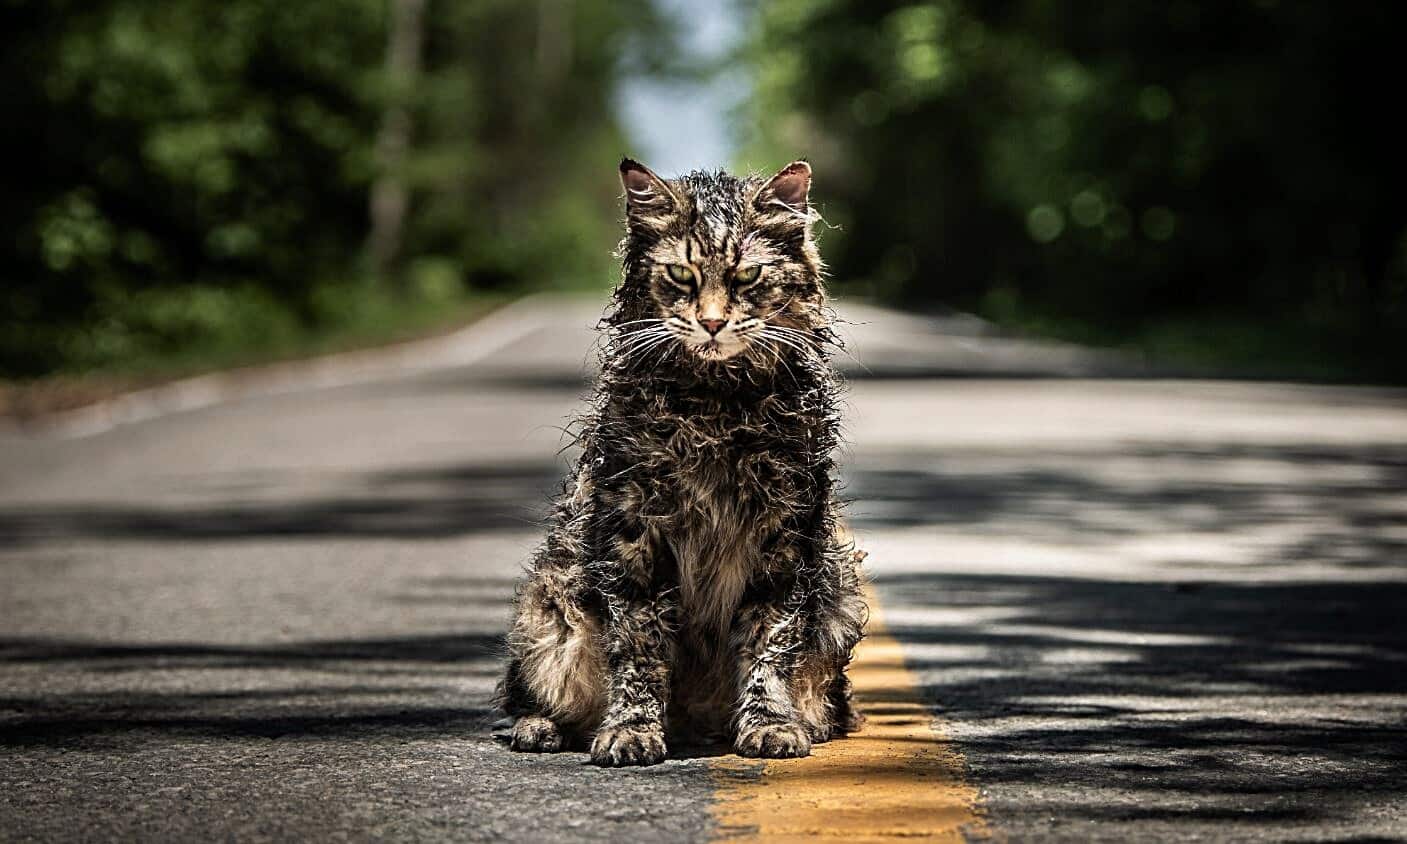 Stephen King Says 'Pet Sematary' Is 